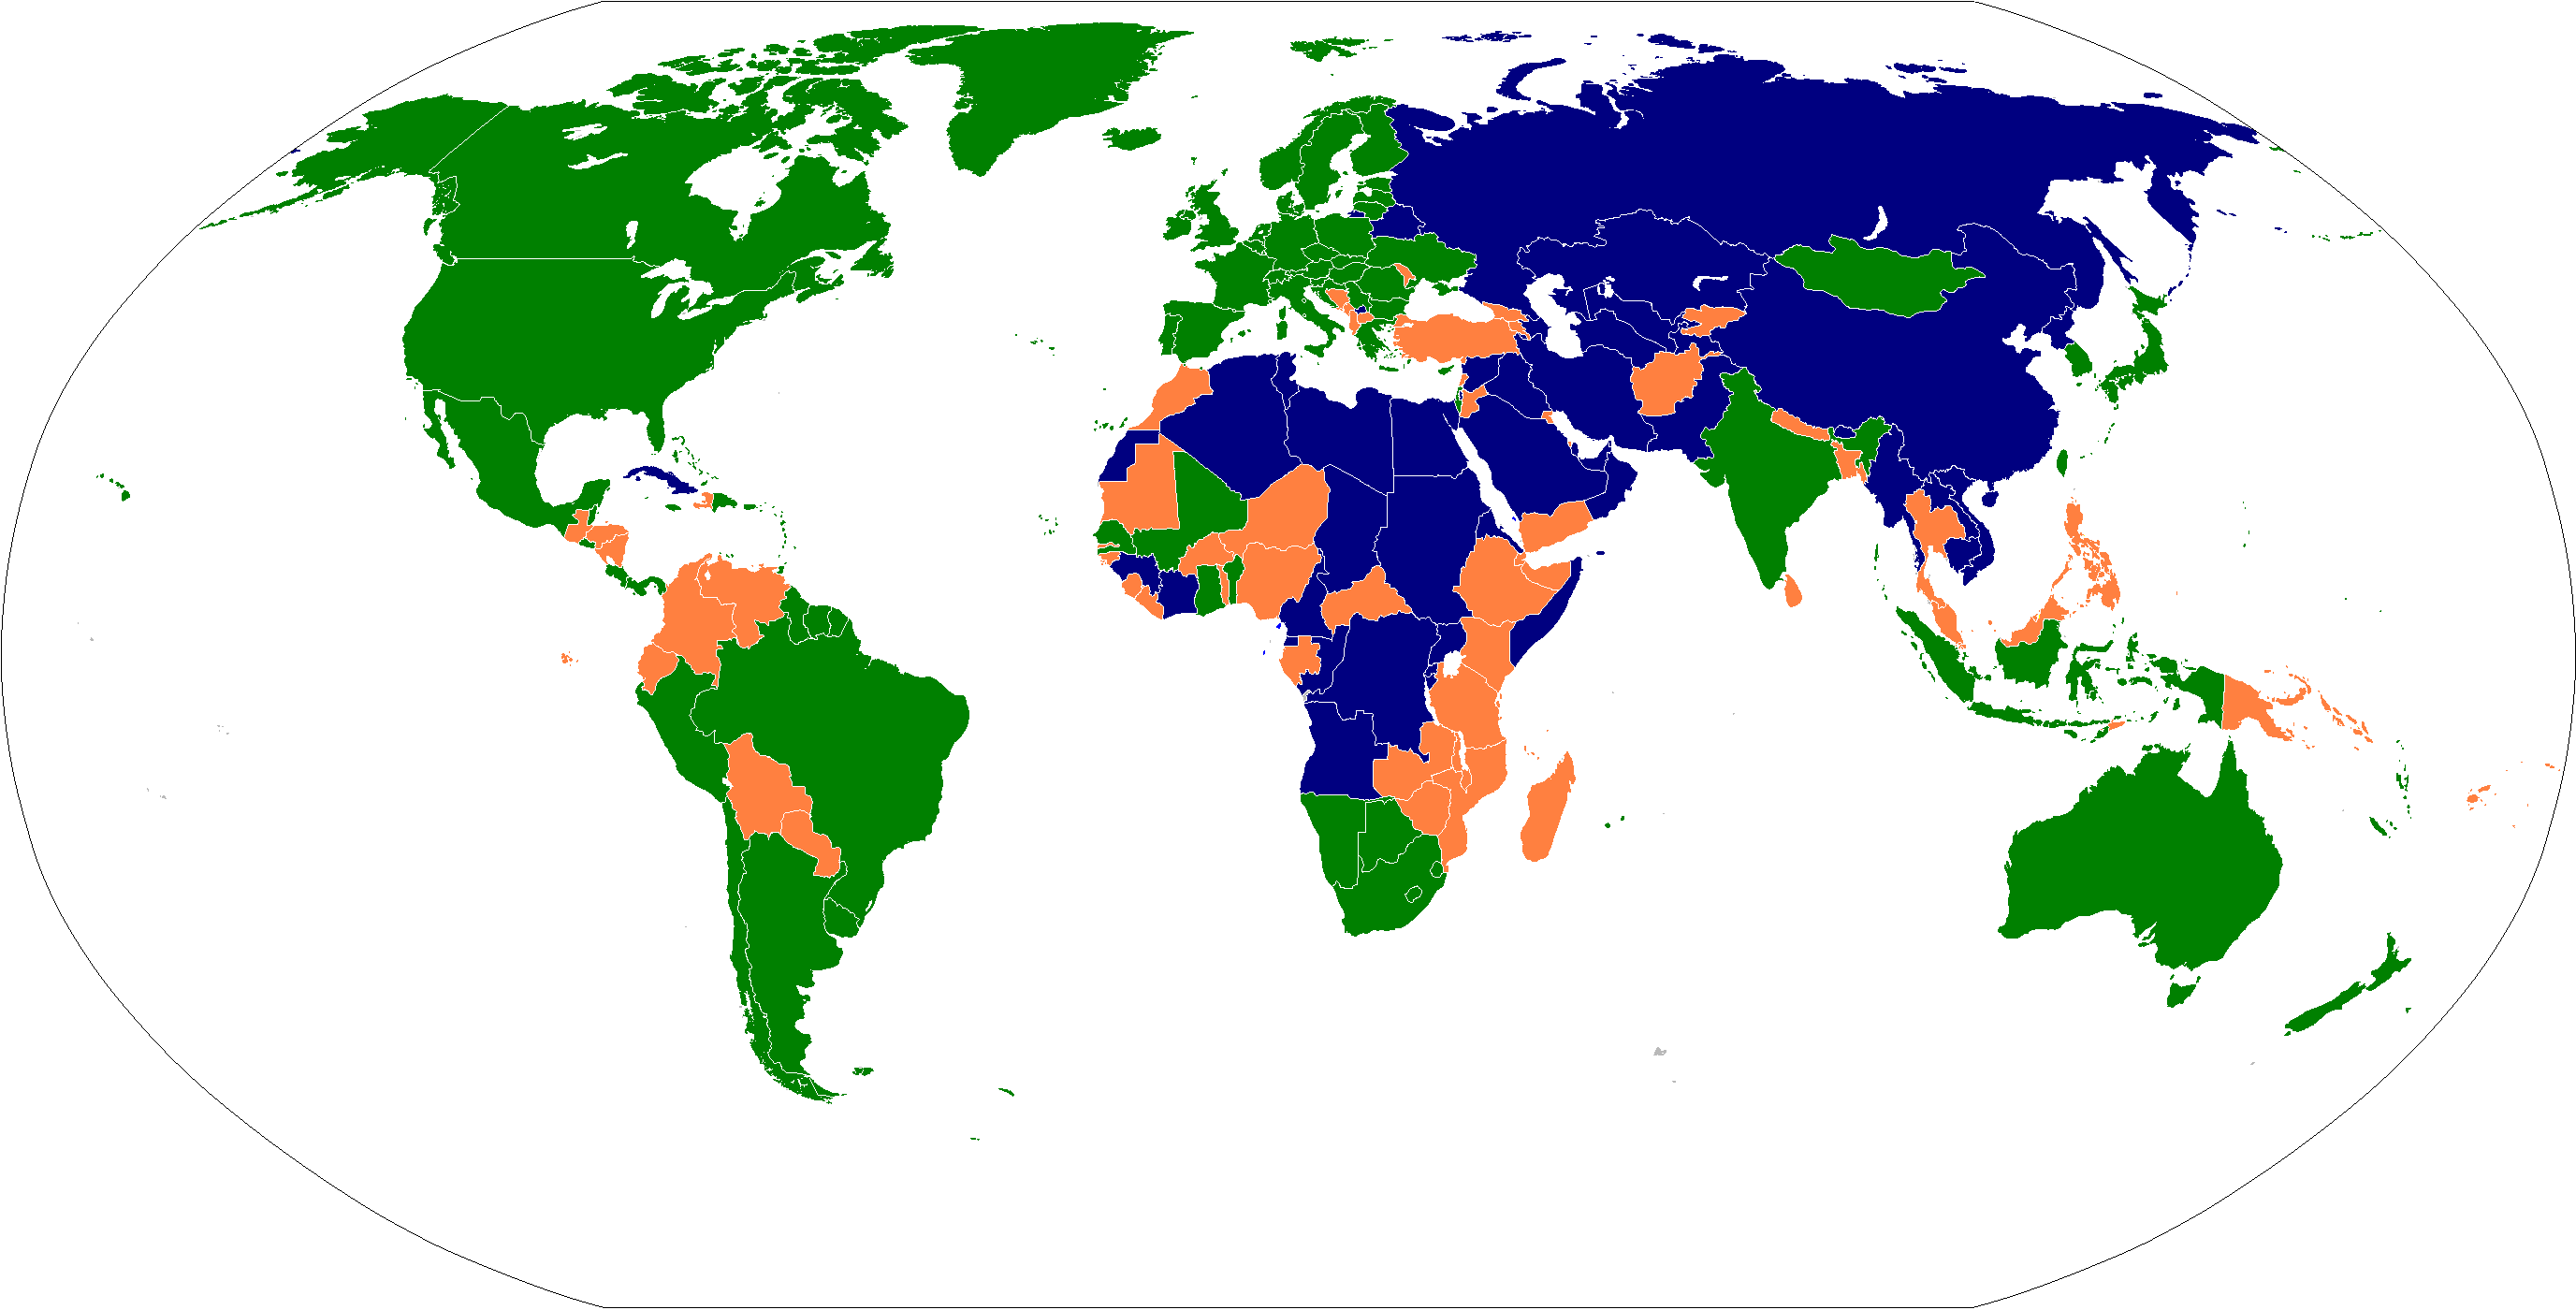 Freedom_House_world_map_2008_blue.png